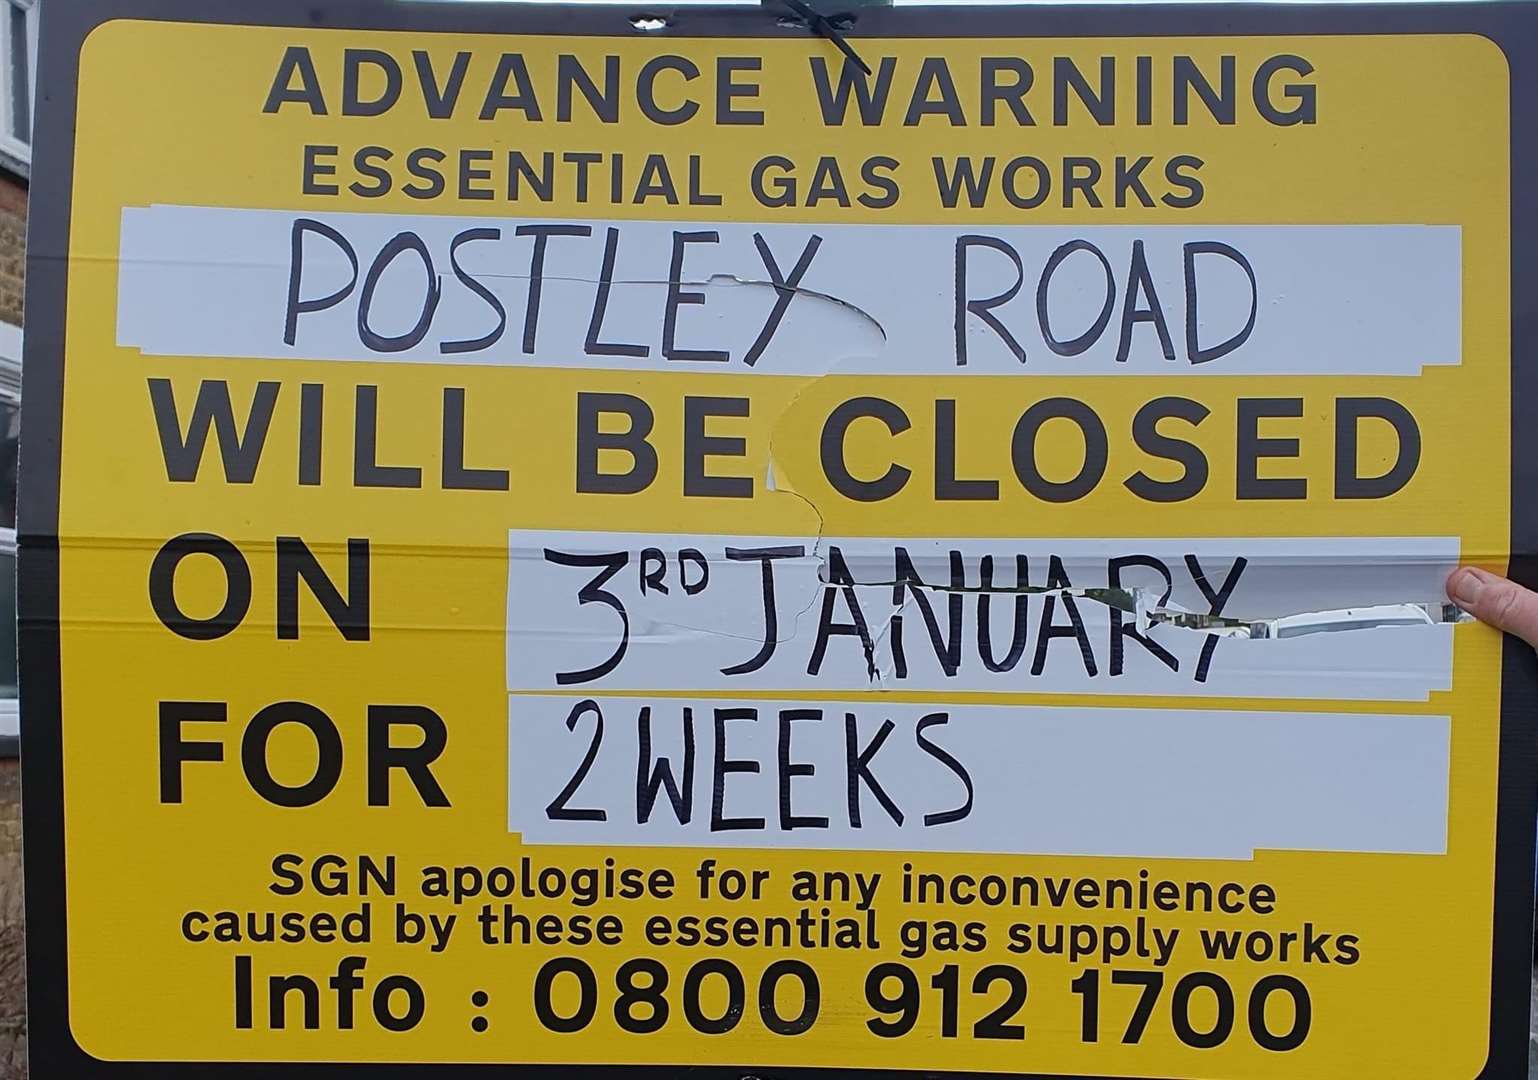 The essential gas works have now been postponed. Picture: Angela Sinclair